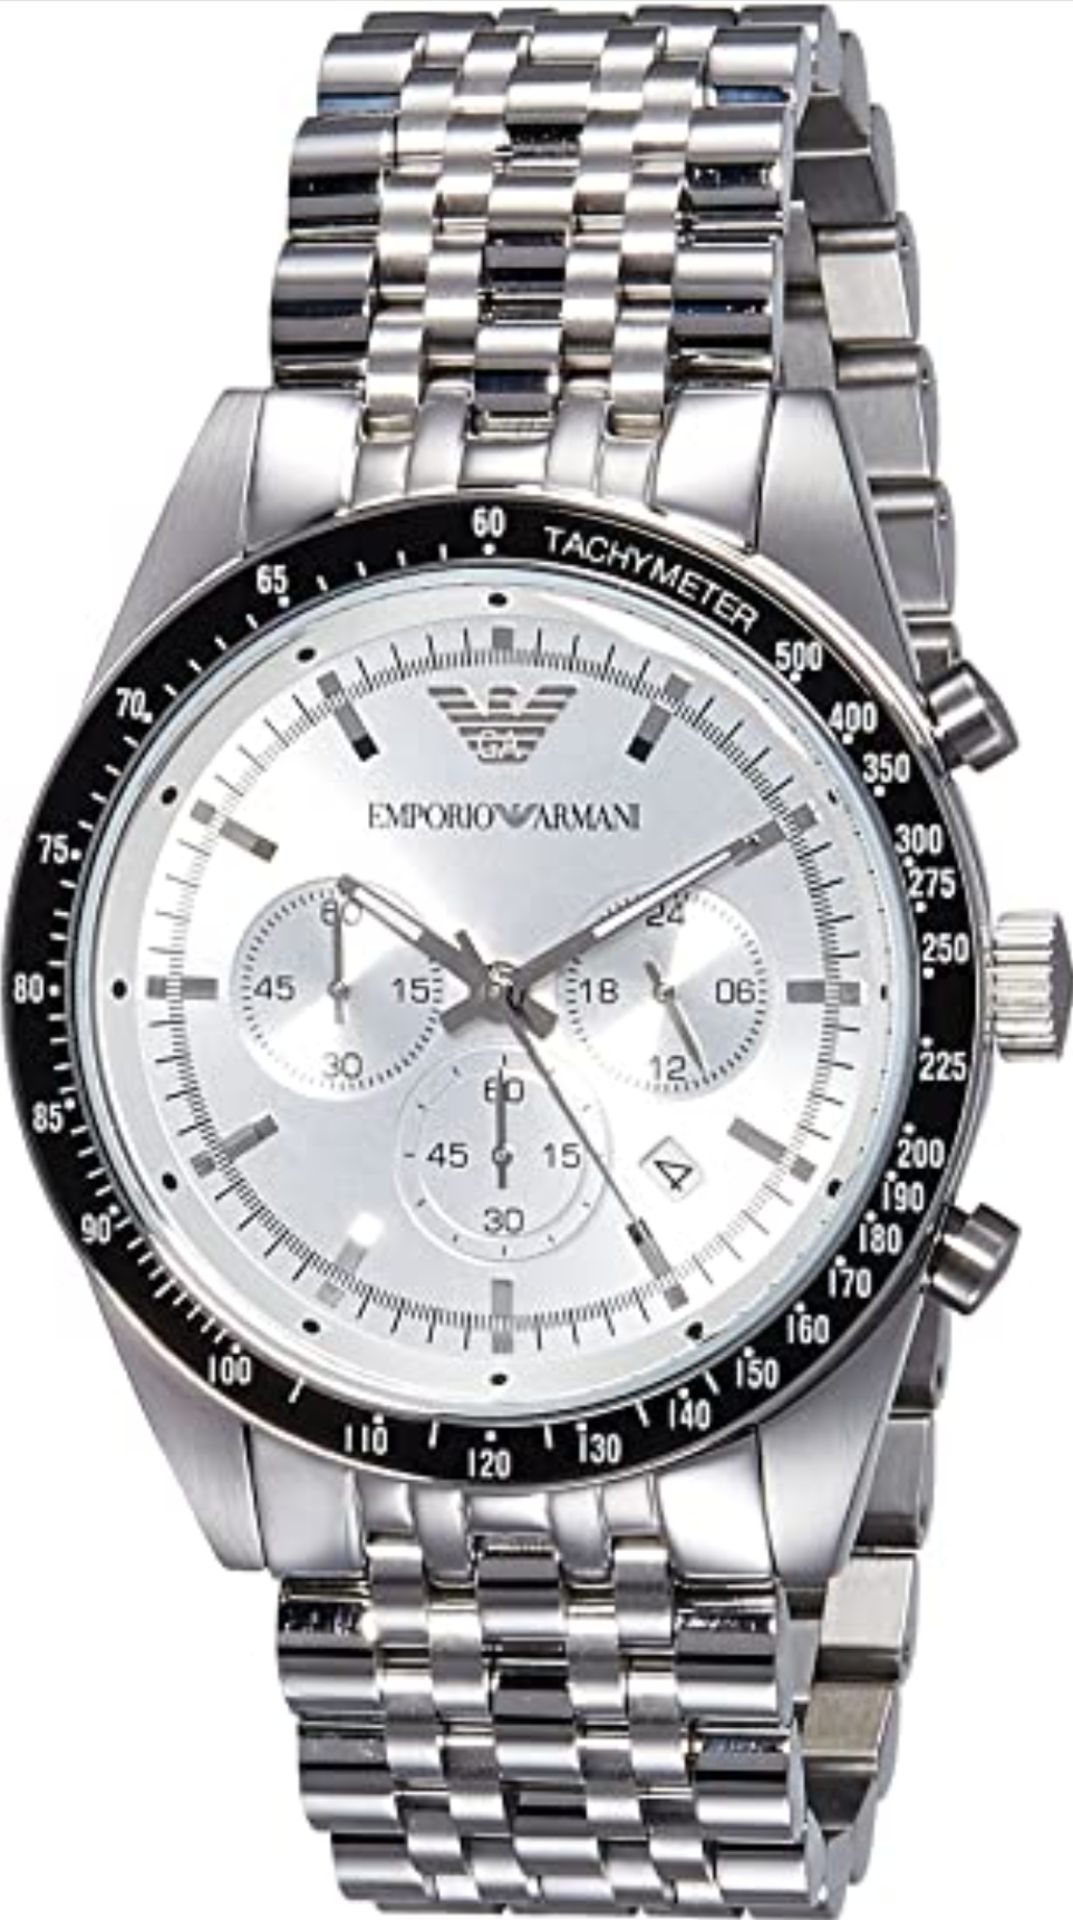 AR6073 Emporio Armani Men's Sportivo Silver Stainless Steel Chronograph Watch - Image 2 of 8